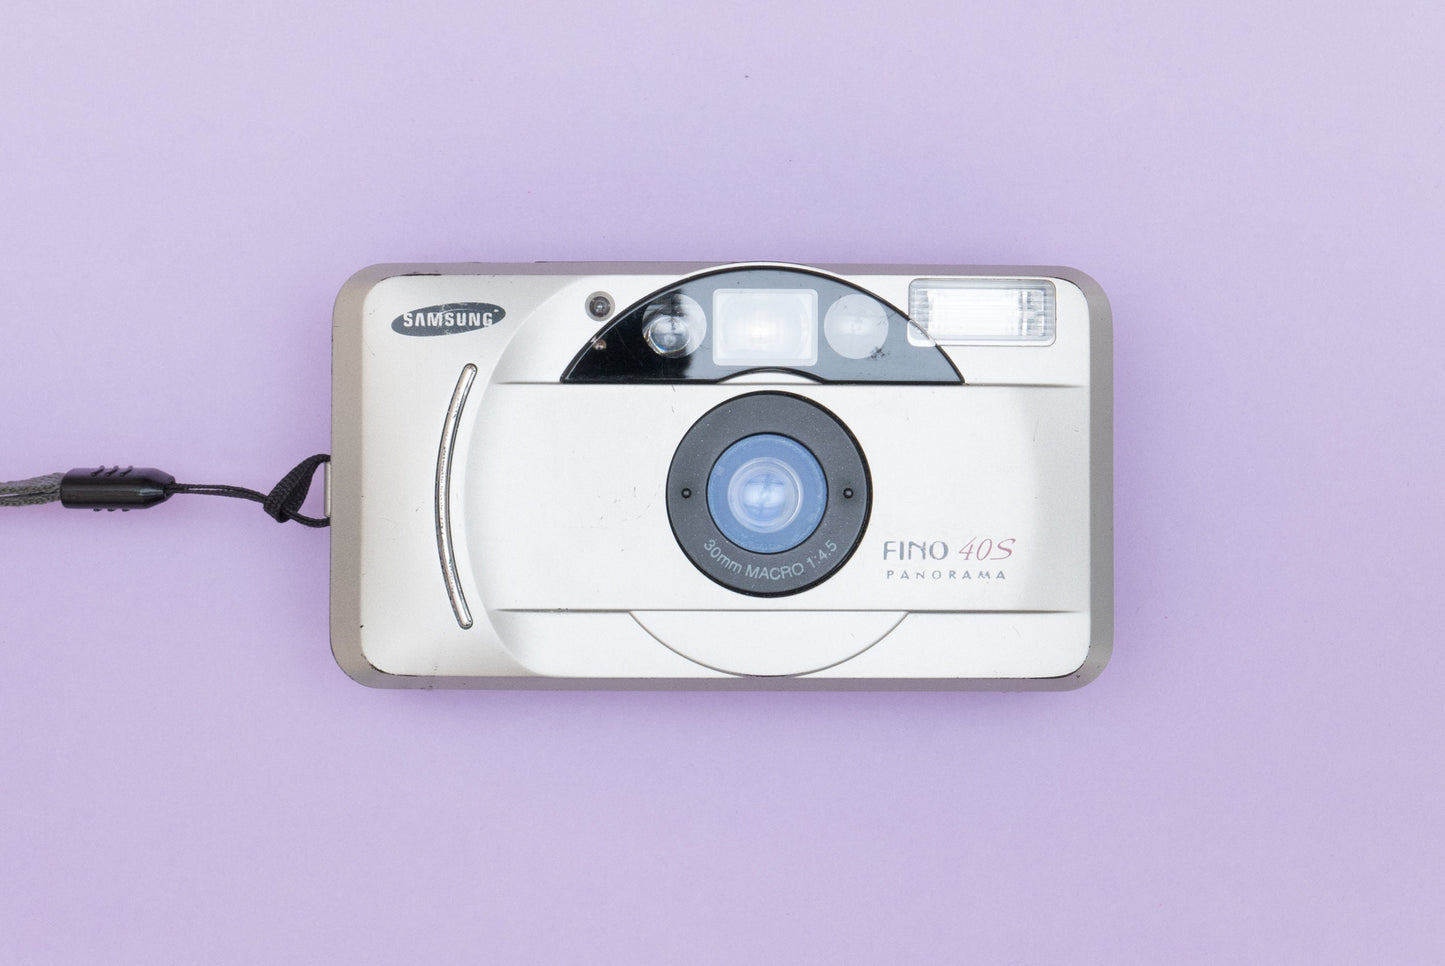 Samsung Fino 40S PANORAMA Compact 35mm Point and Shoot Film Camera